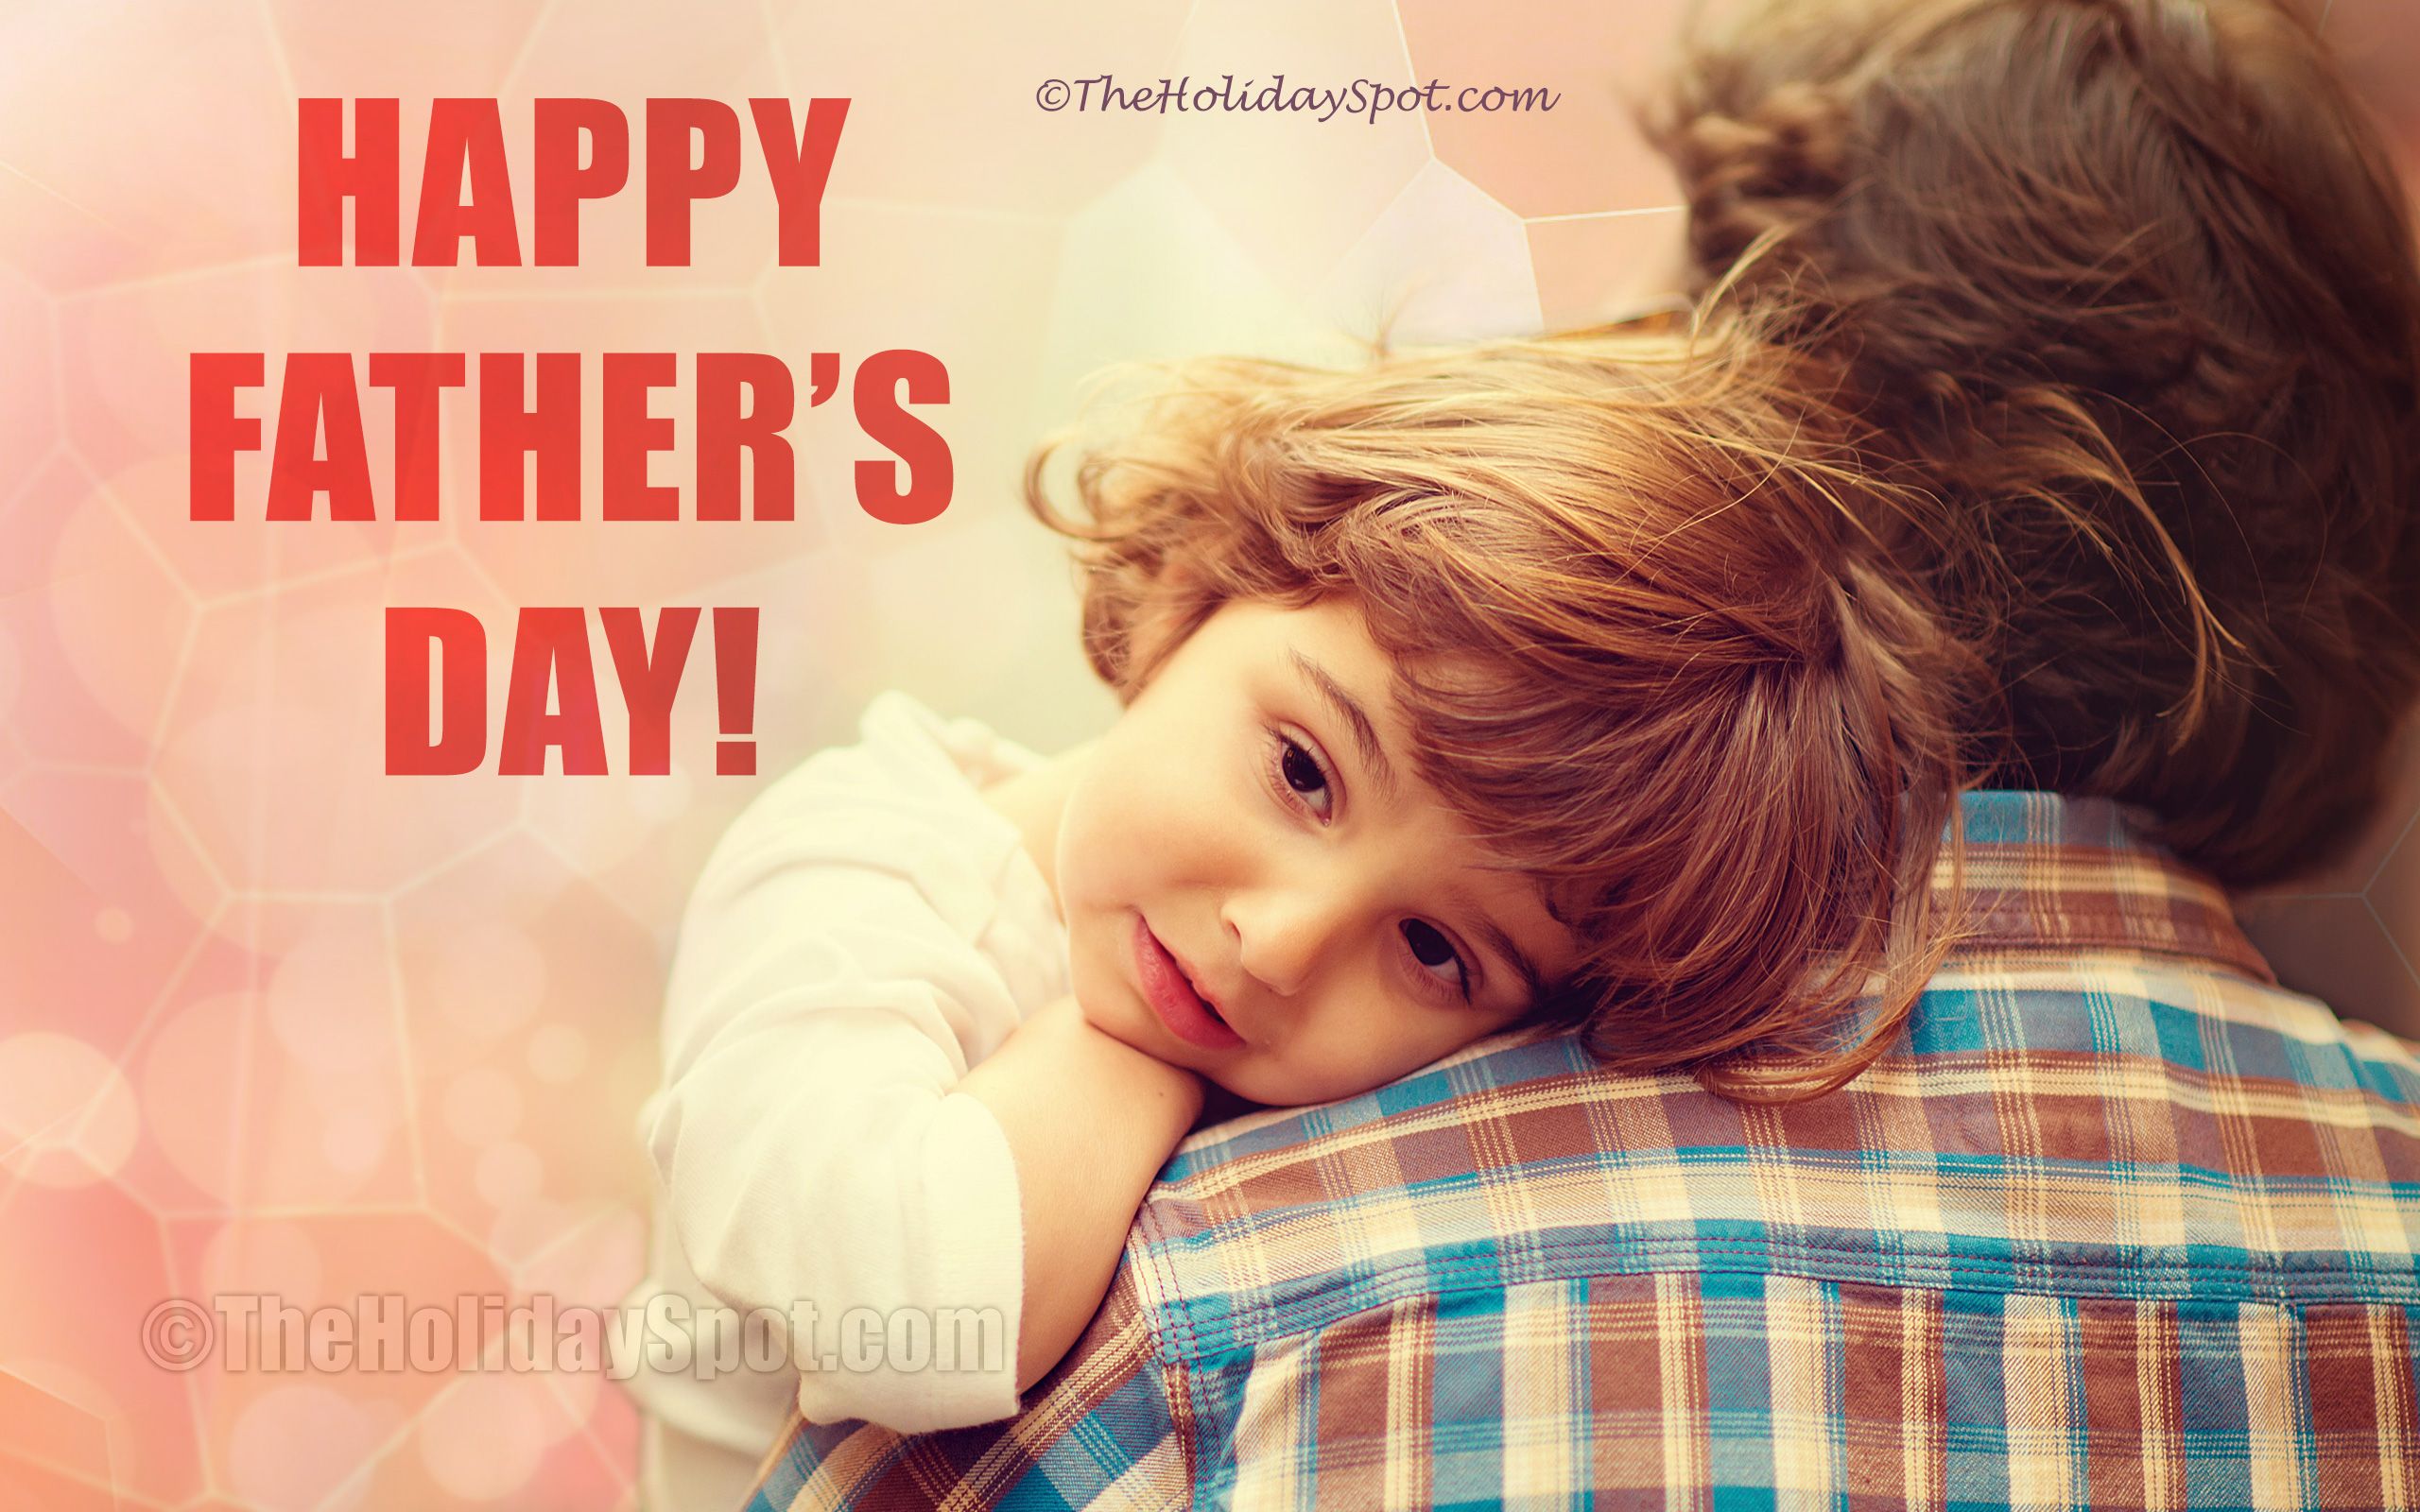 Fathers Day Wallpaper. Fathers Day Image 2021 HD. Happy Fathers Day Image